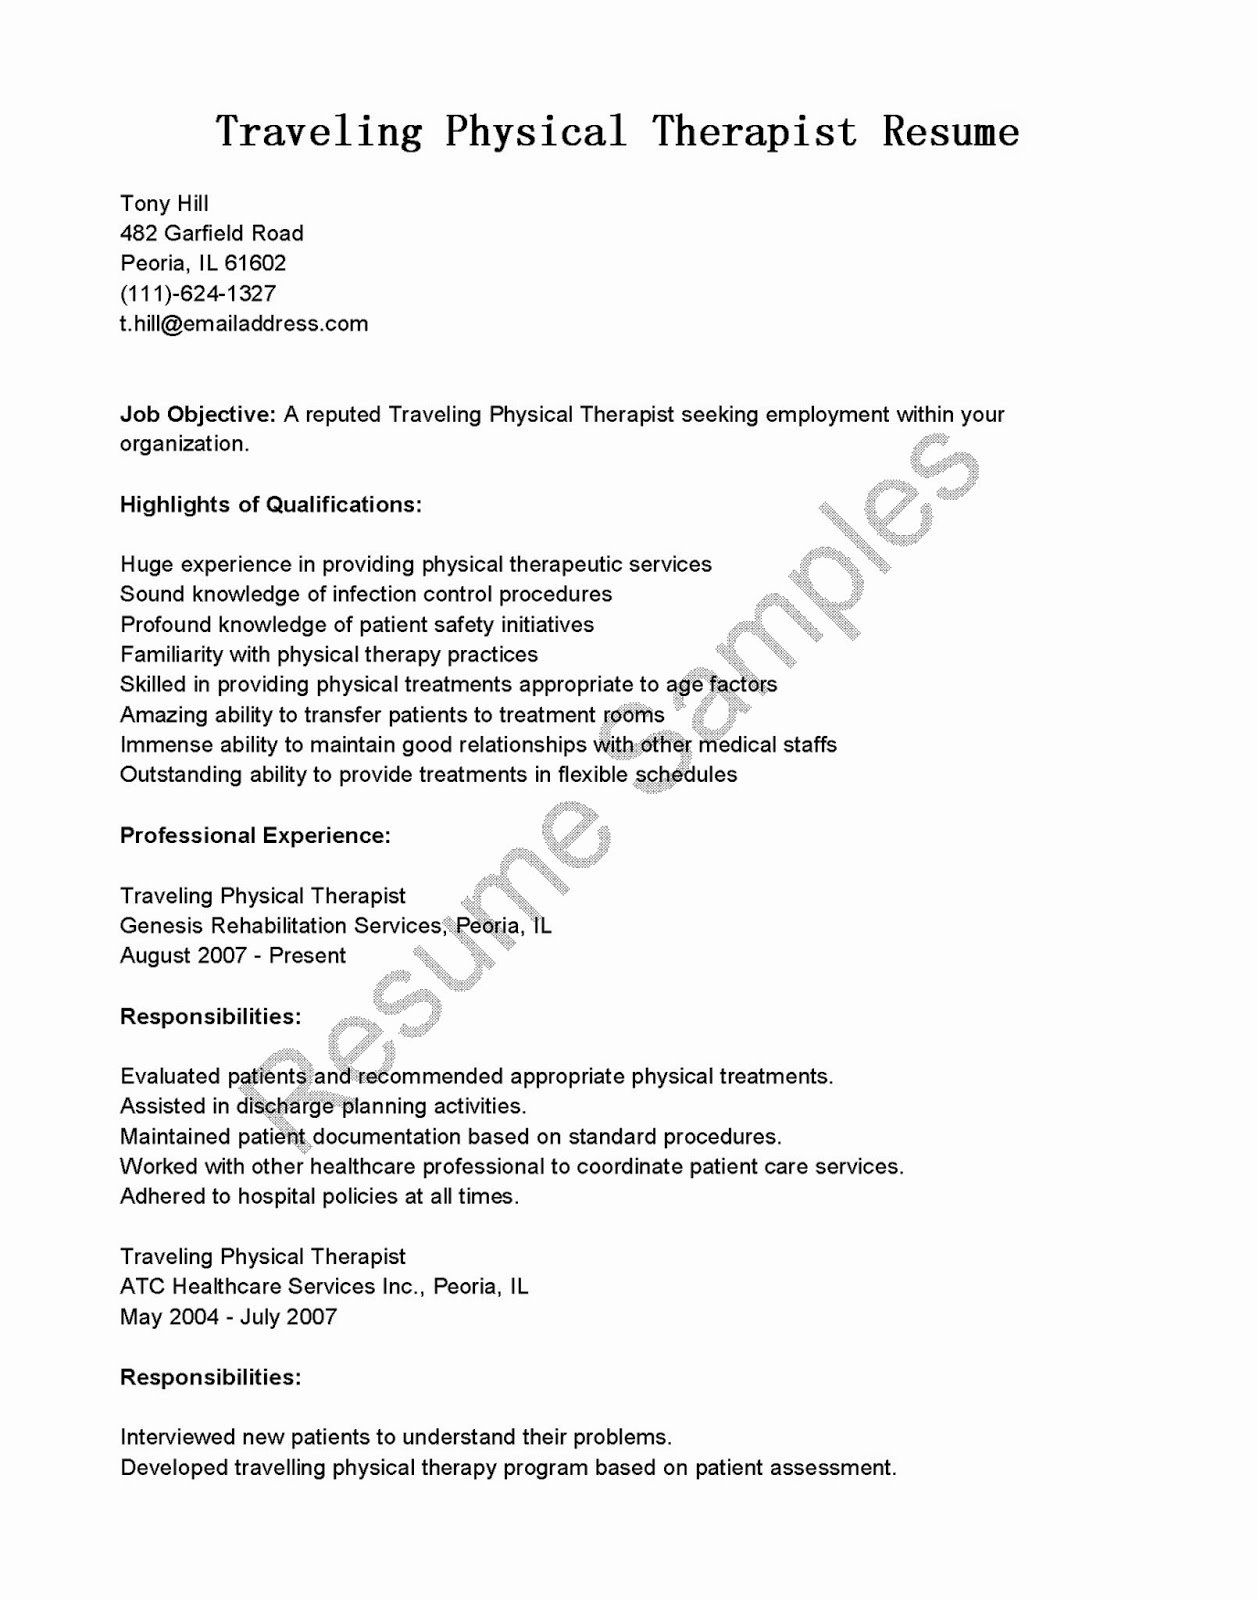 Resume Samples Traveling Physical therapist Resume